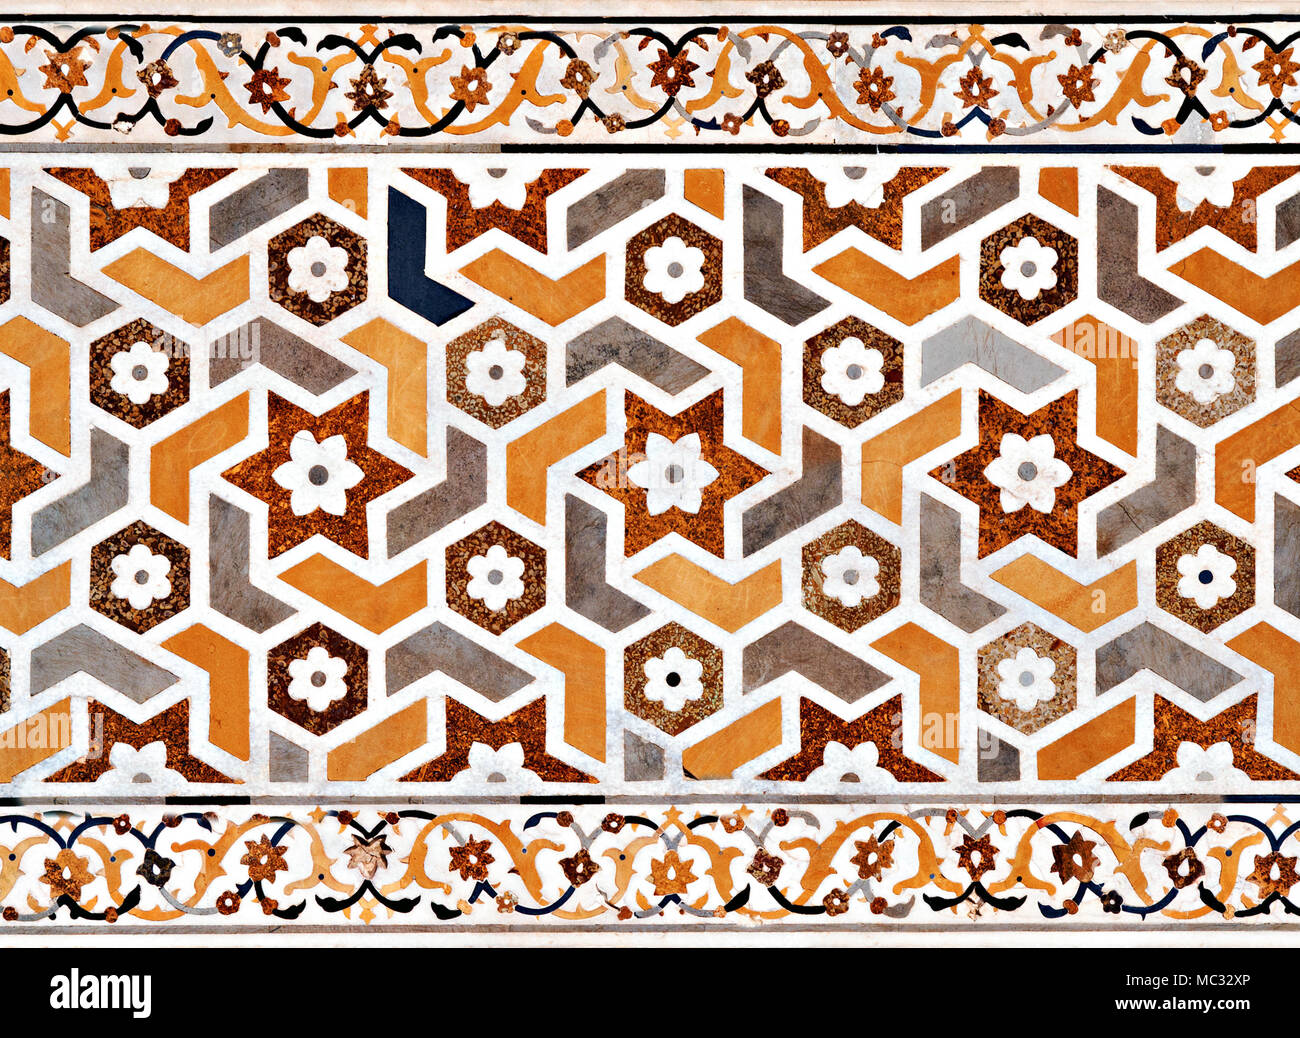 AGRA, INDIA - APRIL 09: Pattern on Taj Mahal on April 09, 2012 in Agra, India. Taj Mahal is widely recognized as the jewel of Muslim art and one of th Stock Photo